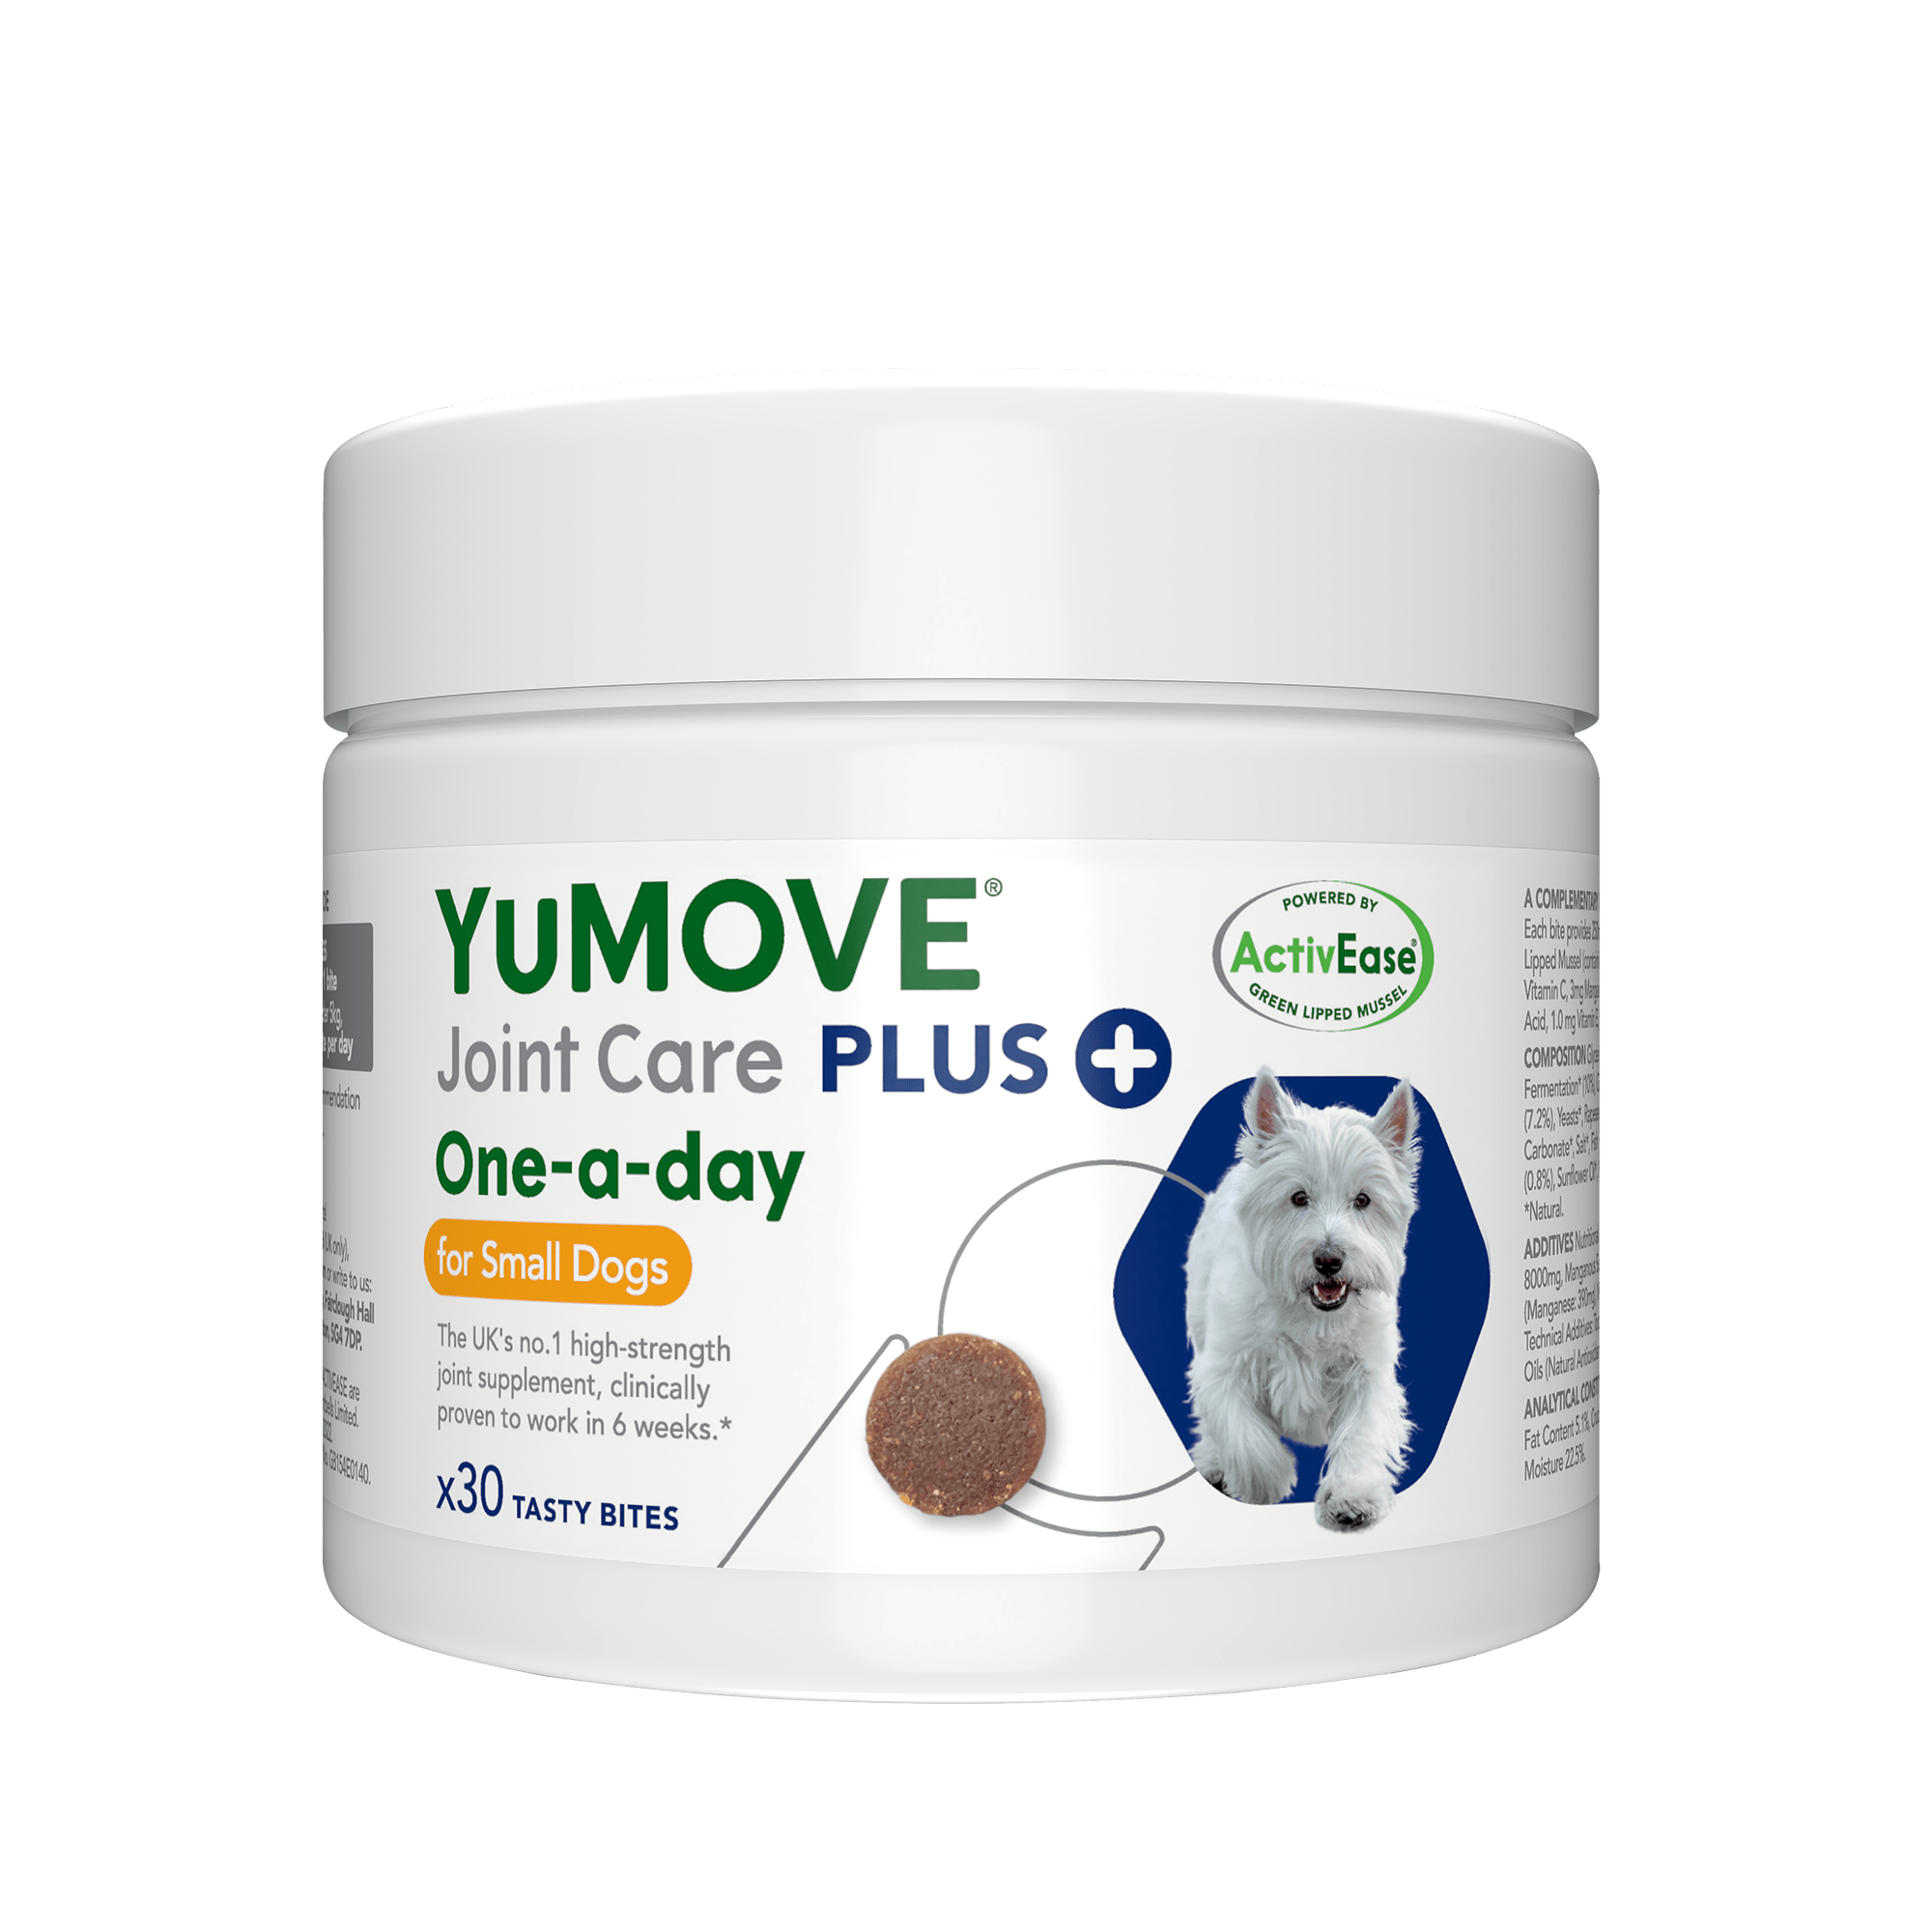 YuMOVE Joint Care PLUS One-a-day